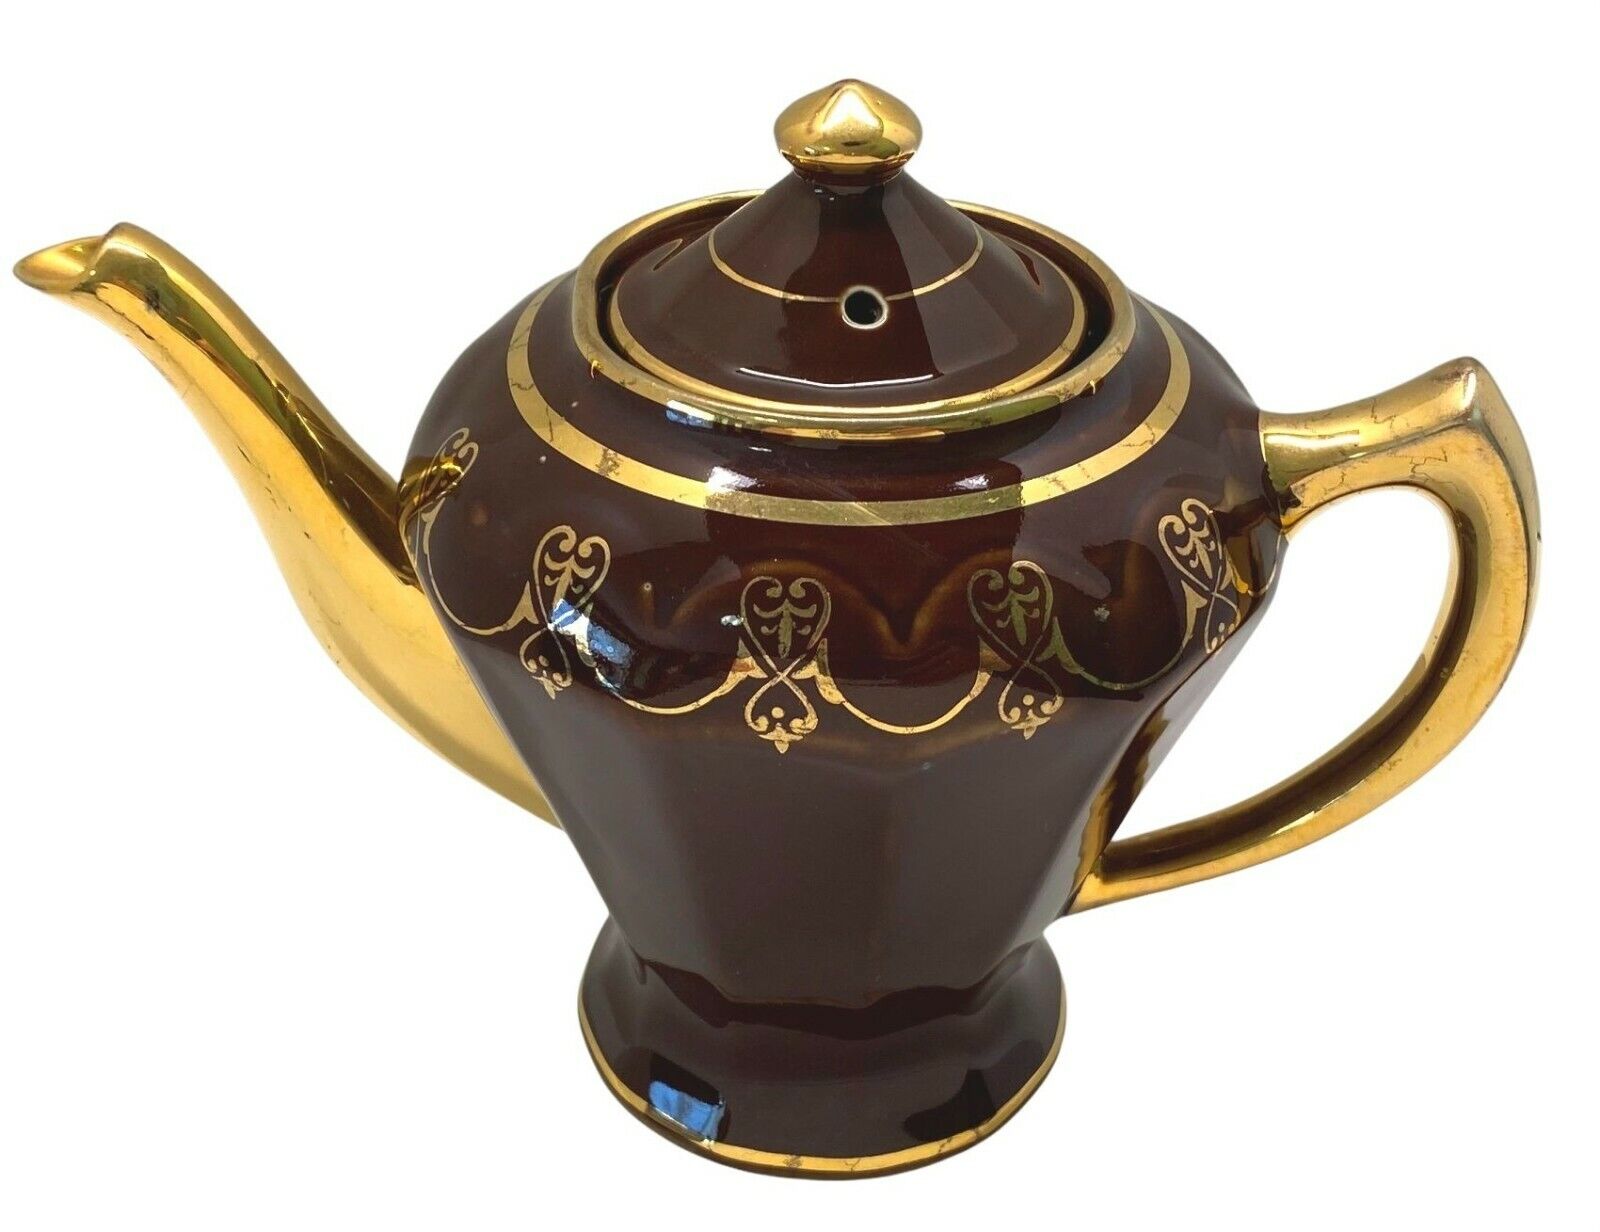 Fraunfelter Ohio Teapot Vintage China Brown with Gold Trim Teapot Floral